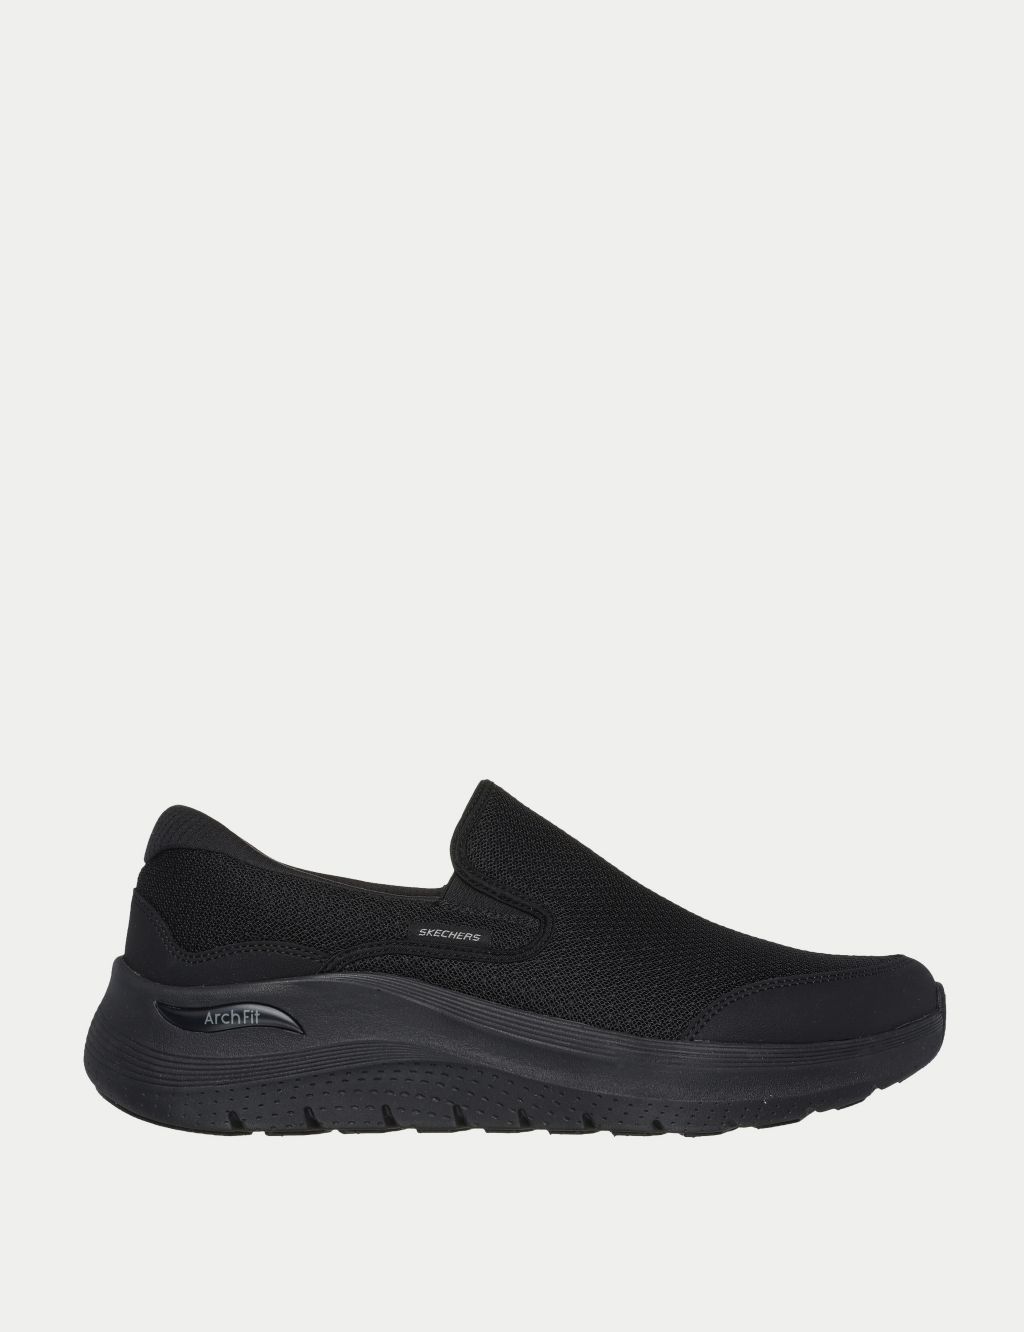 Arch Fit 2.0 Vallo Leather Slip-On Trainers